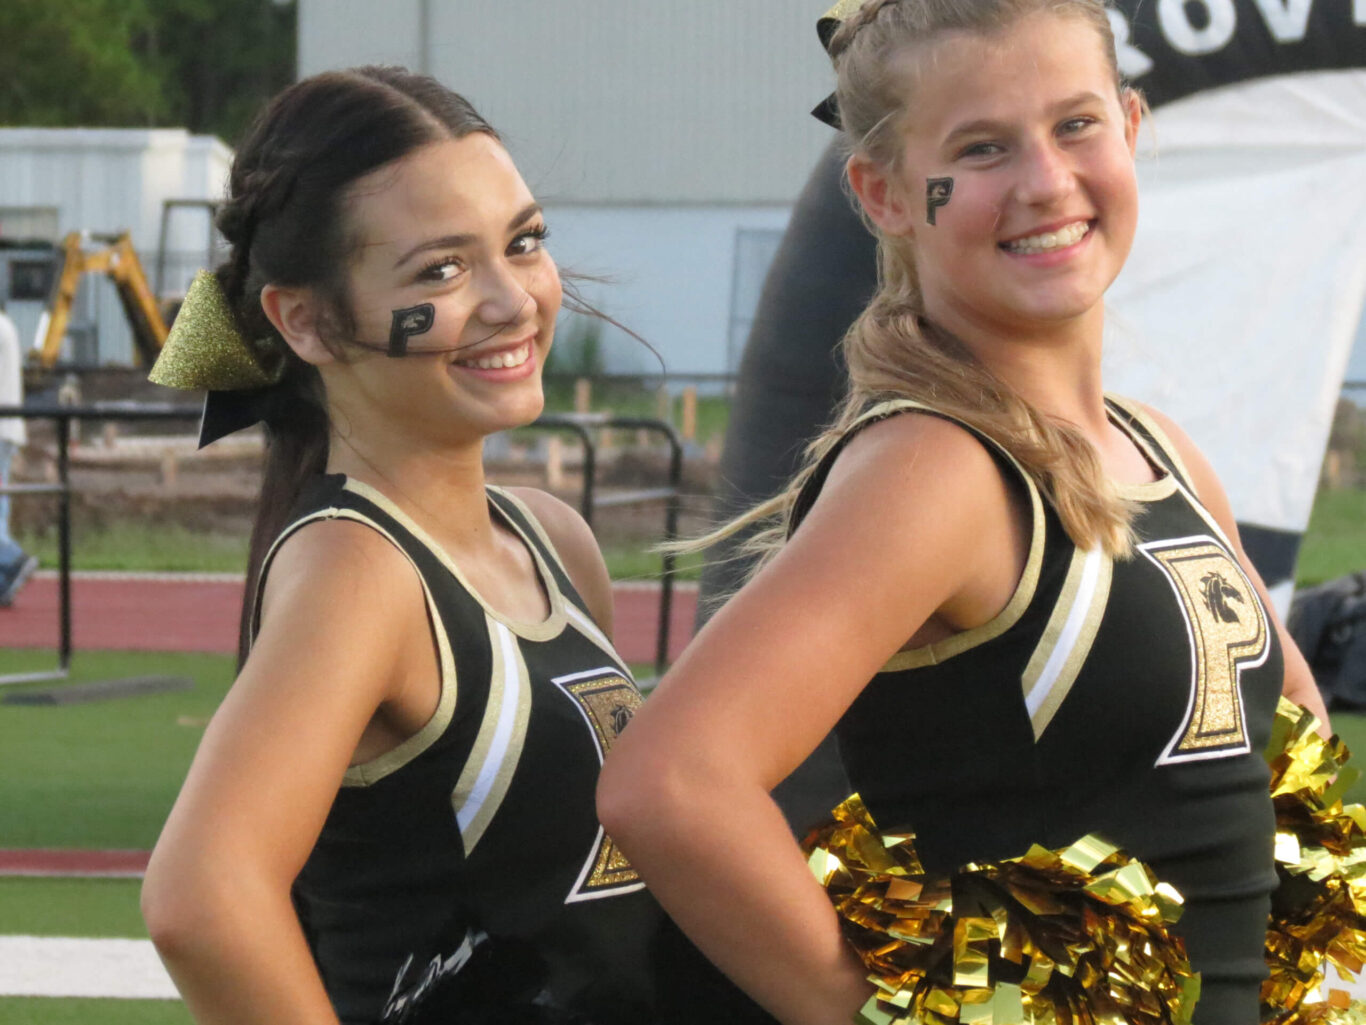 Two competitive cheerleaders posing for a picture.